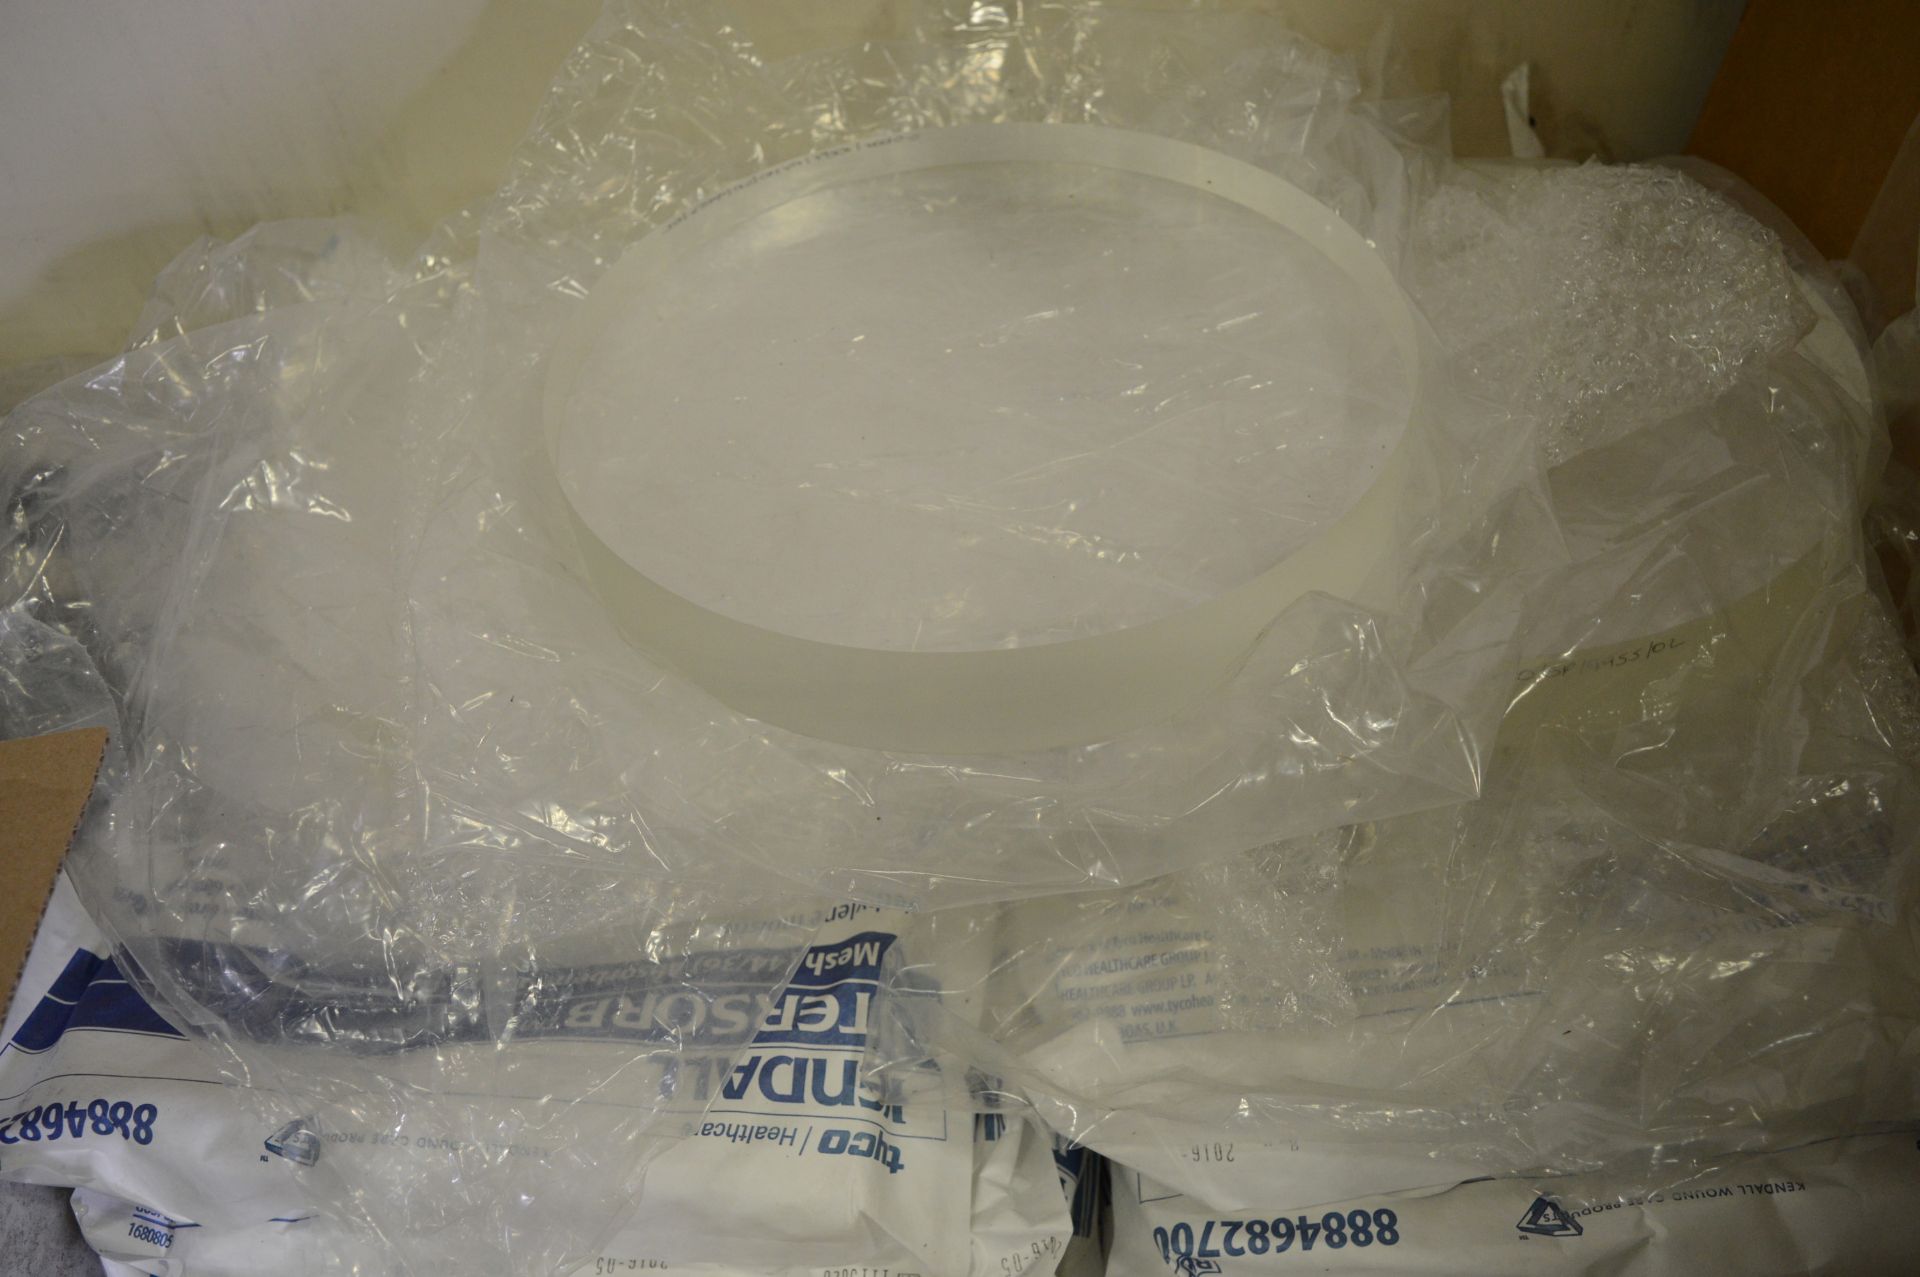 2x Pallets of Medical Supplies inc Gauze Pads, Sharps Bins, Perspex Discs. - Image 7 of 10